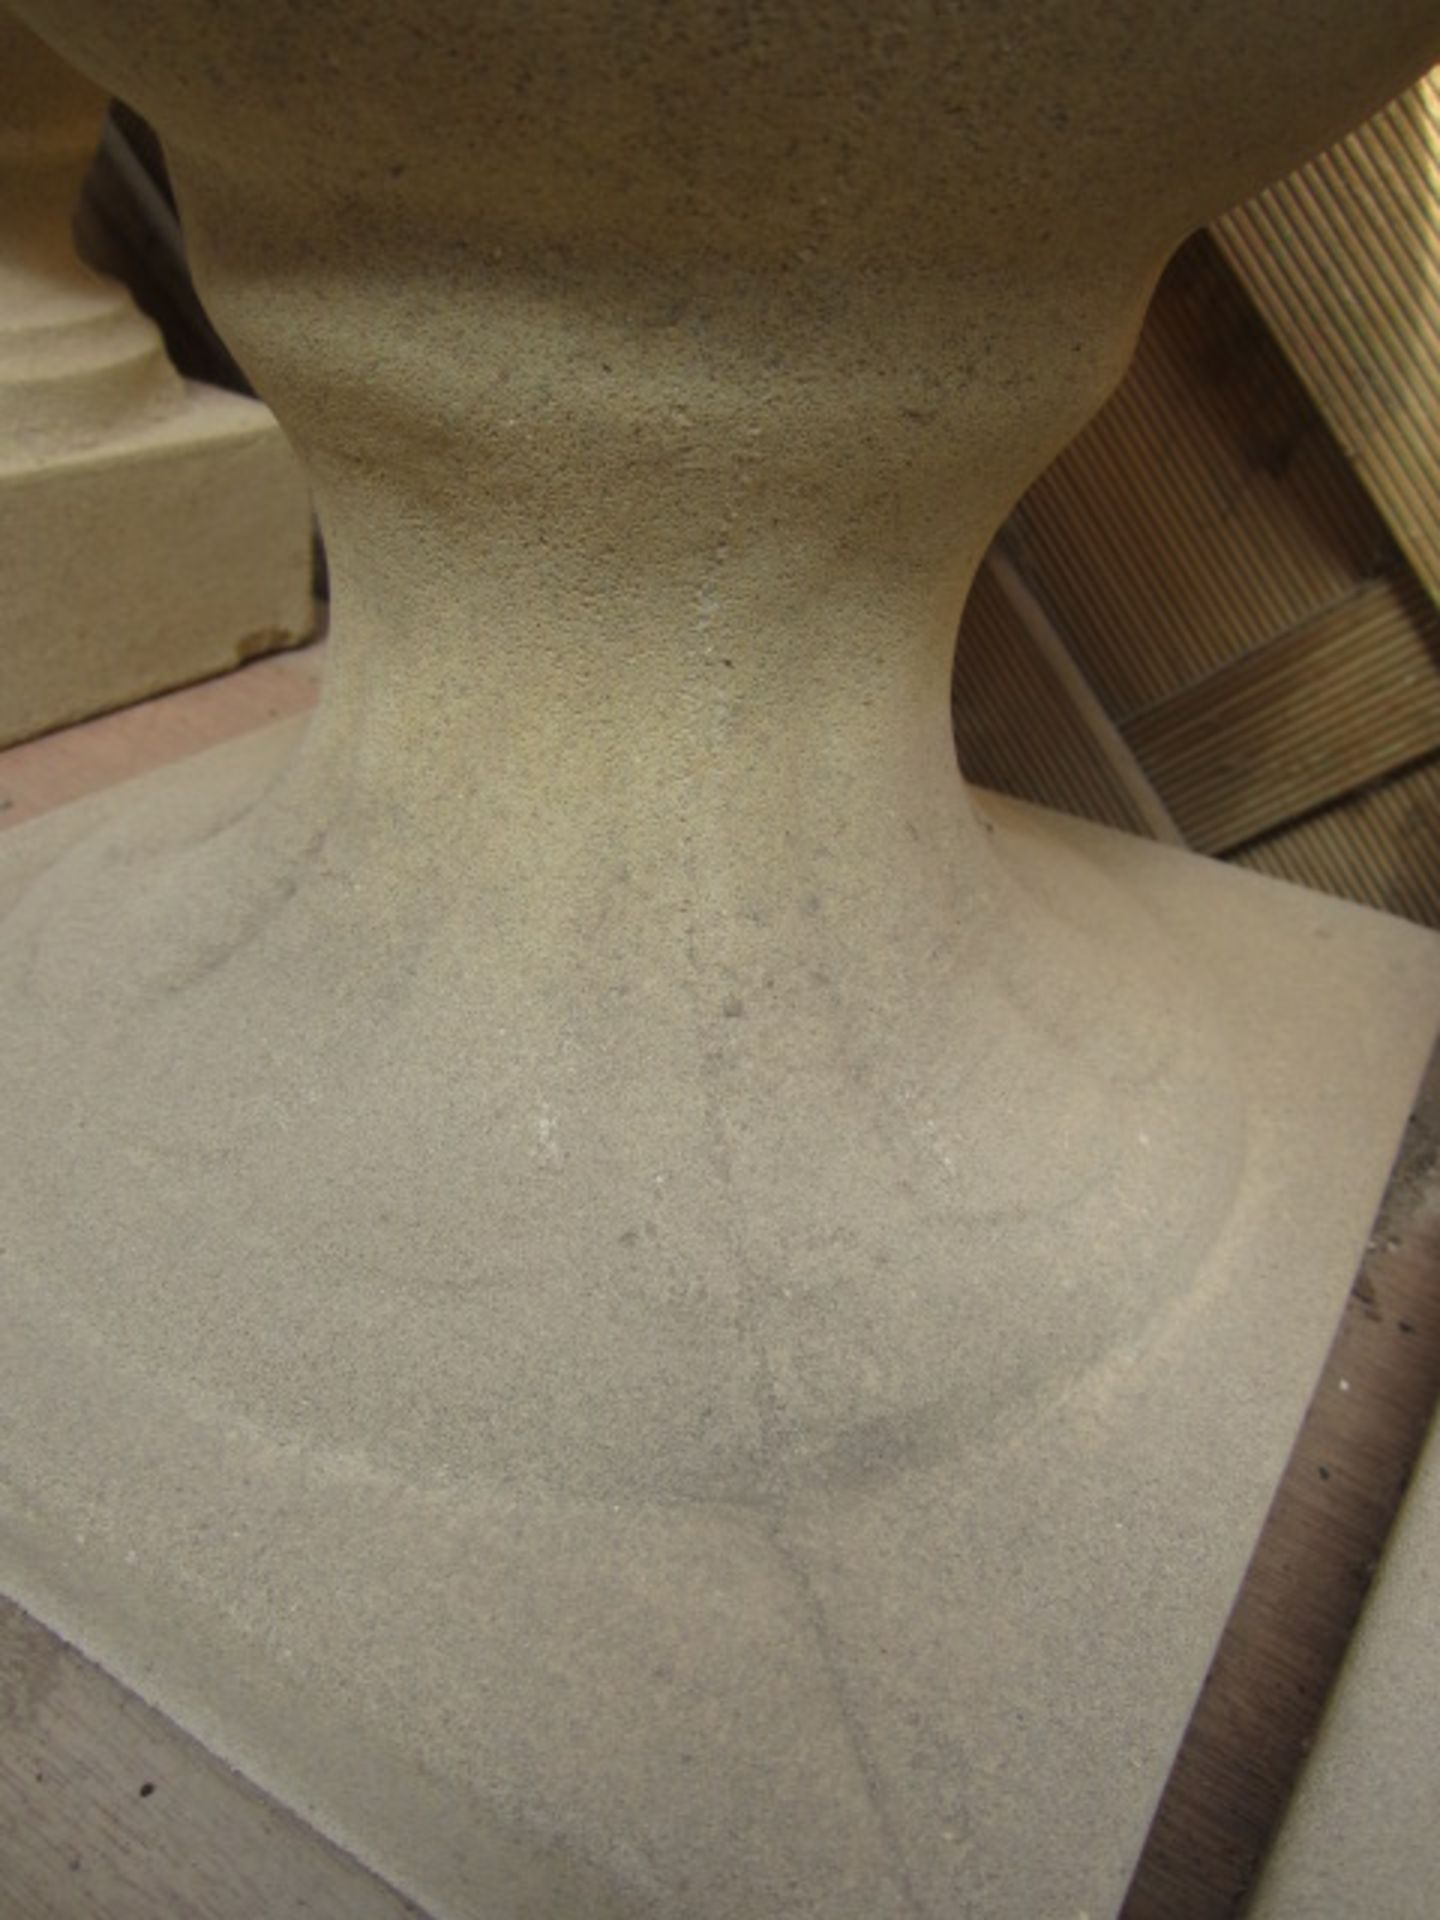 2 x reconstituted concrete stone ball finials, , approx. dimensions: height 360mm x base 230mm x - Image 2 of 2